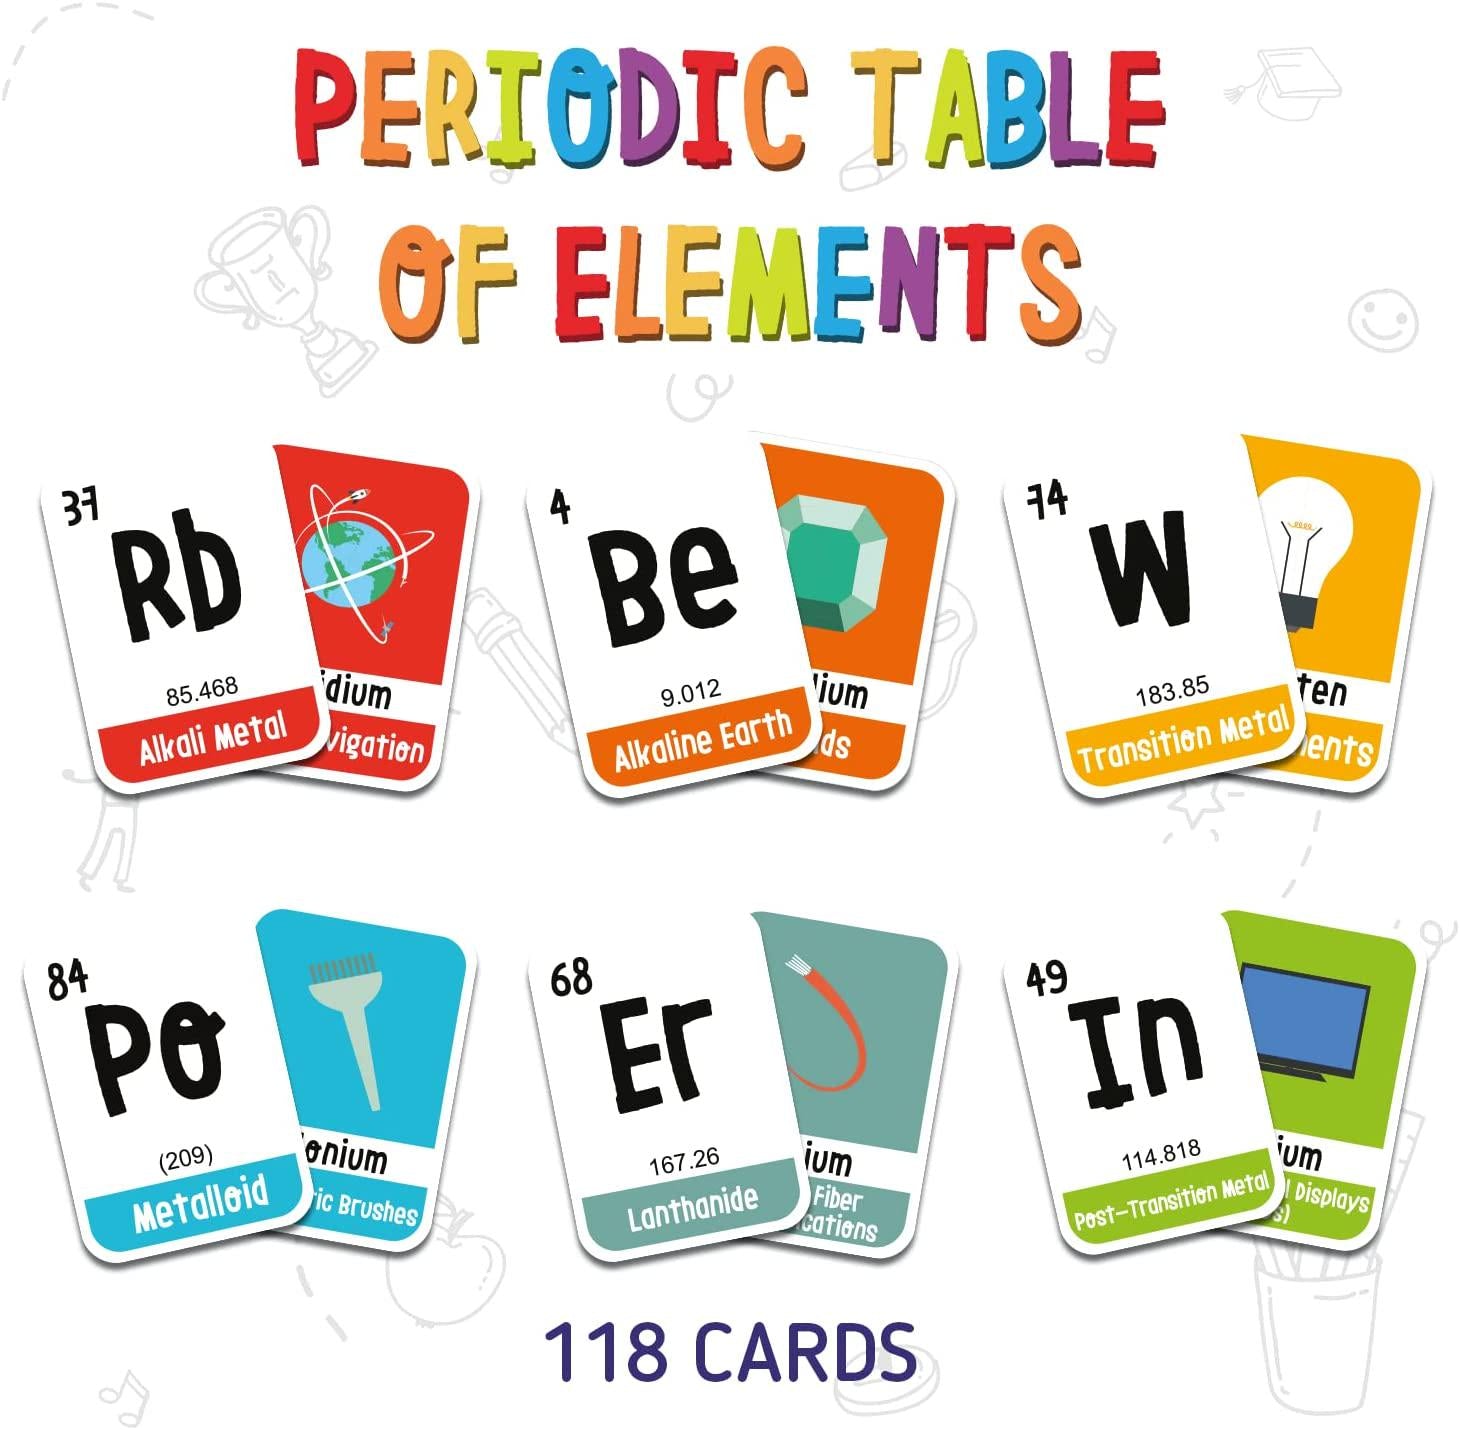 merka, merka 118 Kids Periodic Table of Elements Flash Cards with Beautiful Images Representing Each Chemistry Element - Educational Science for Kids